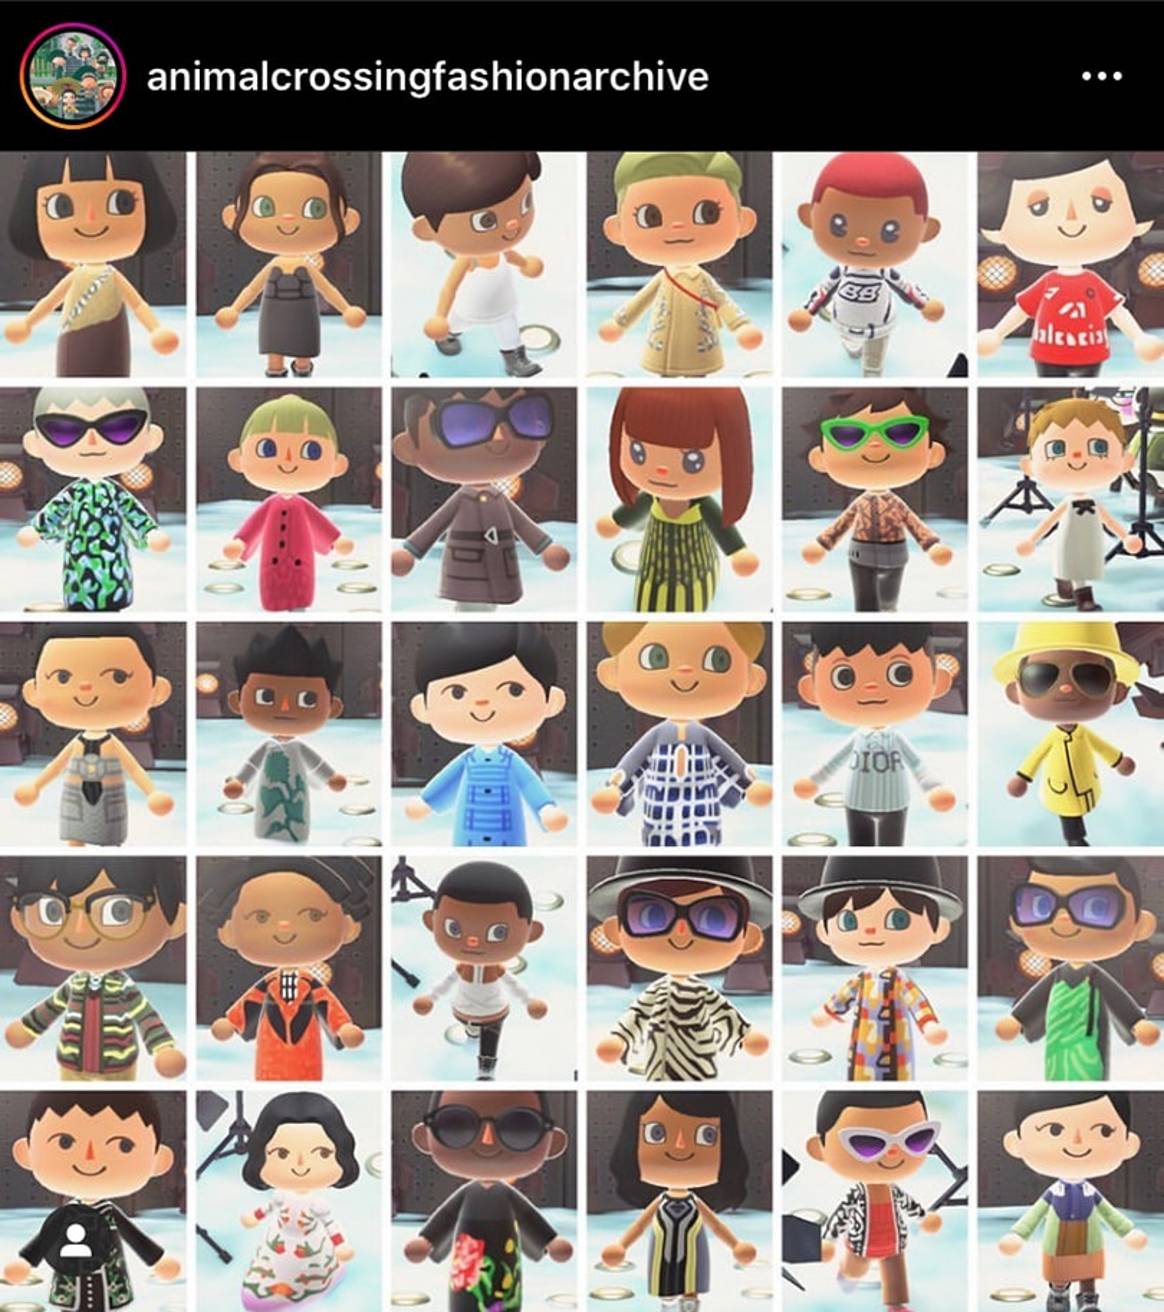 Reference Festival Berlin presents first-ever Animal Crossing fashion show